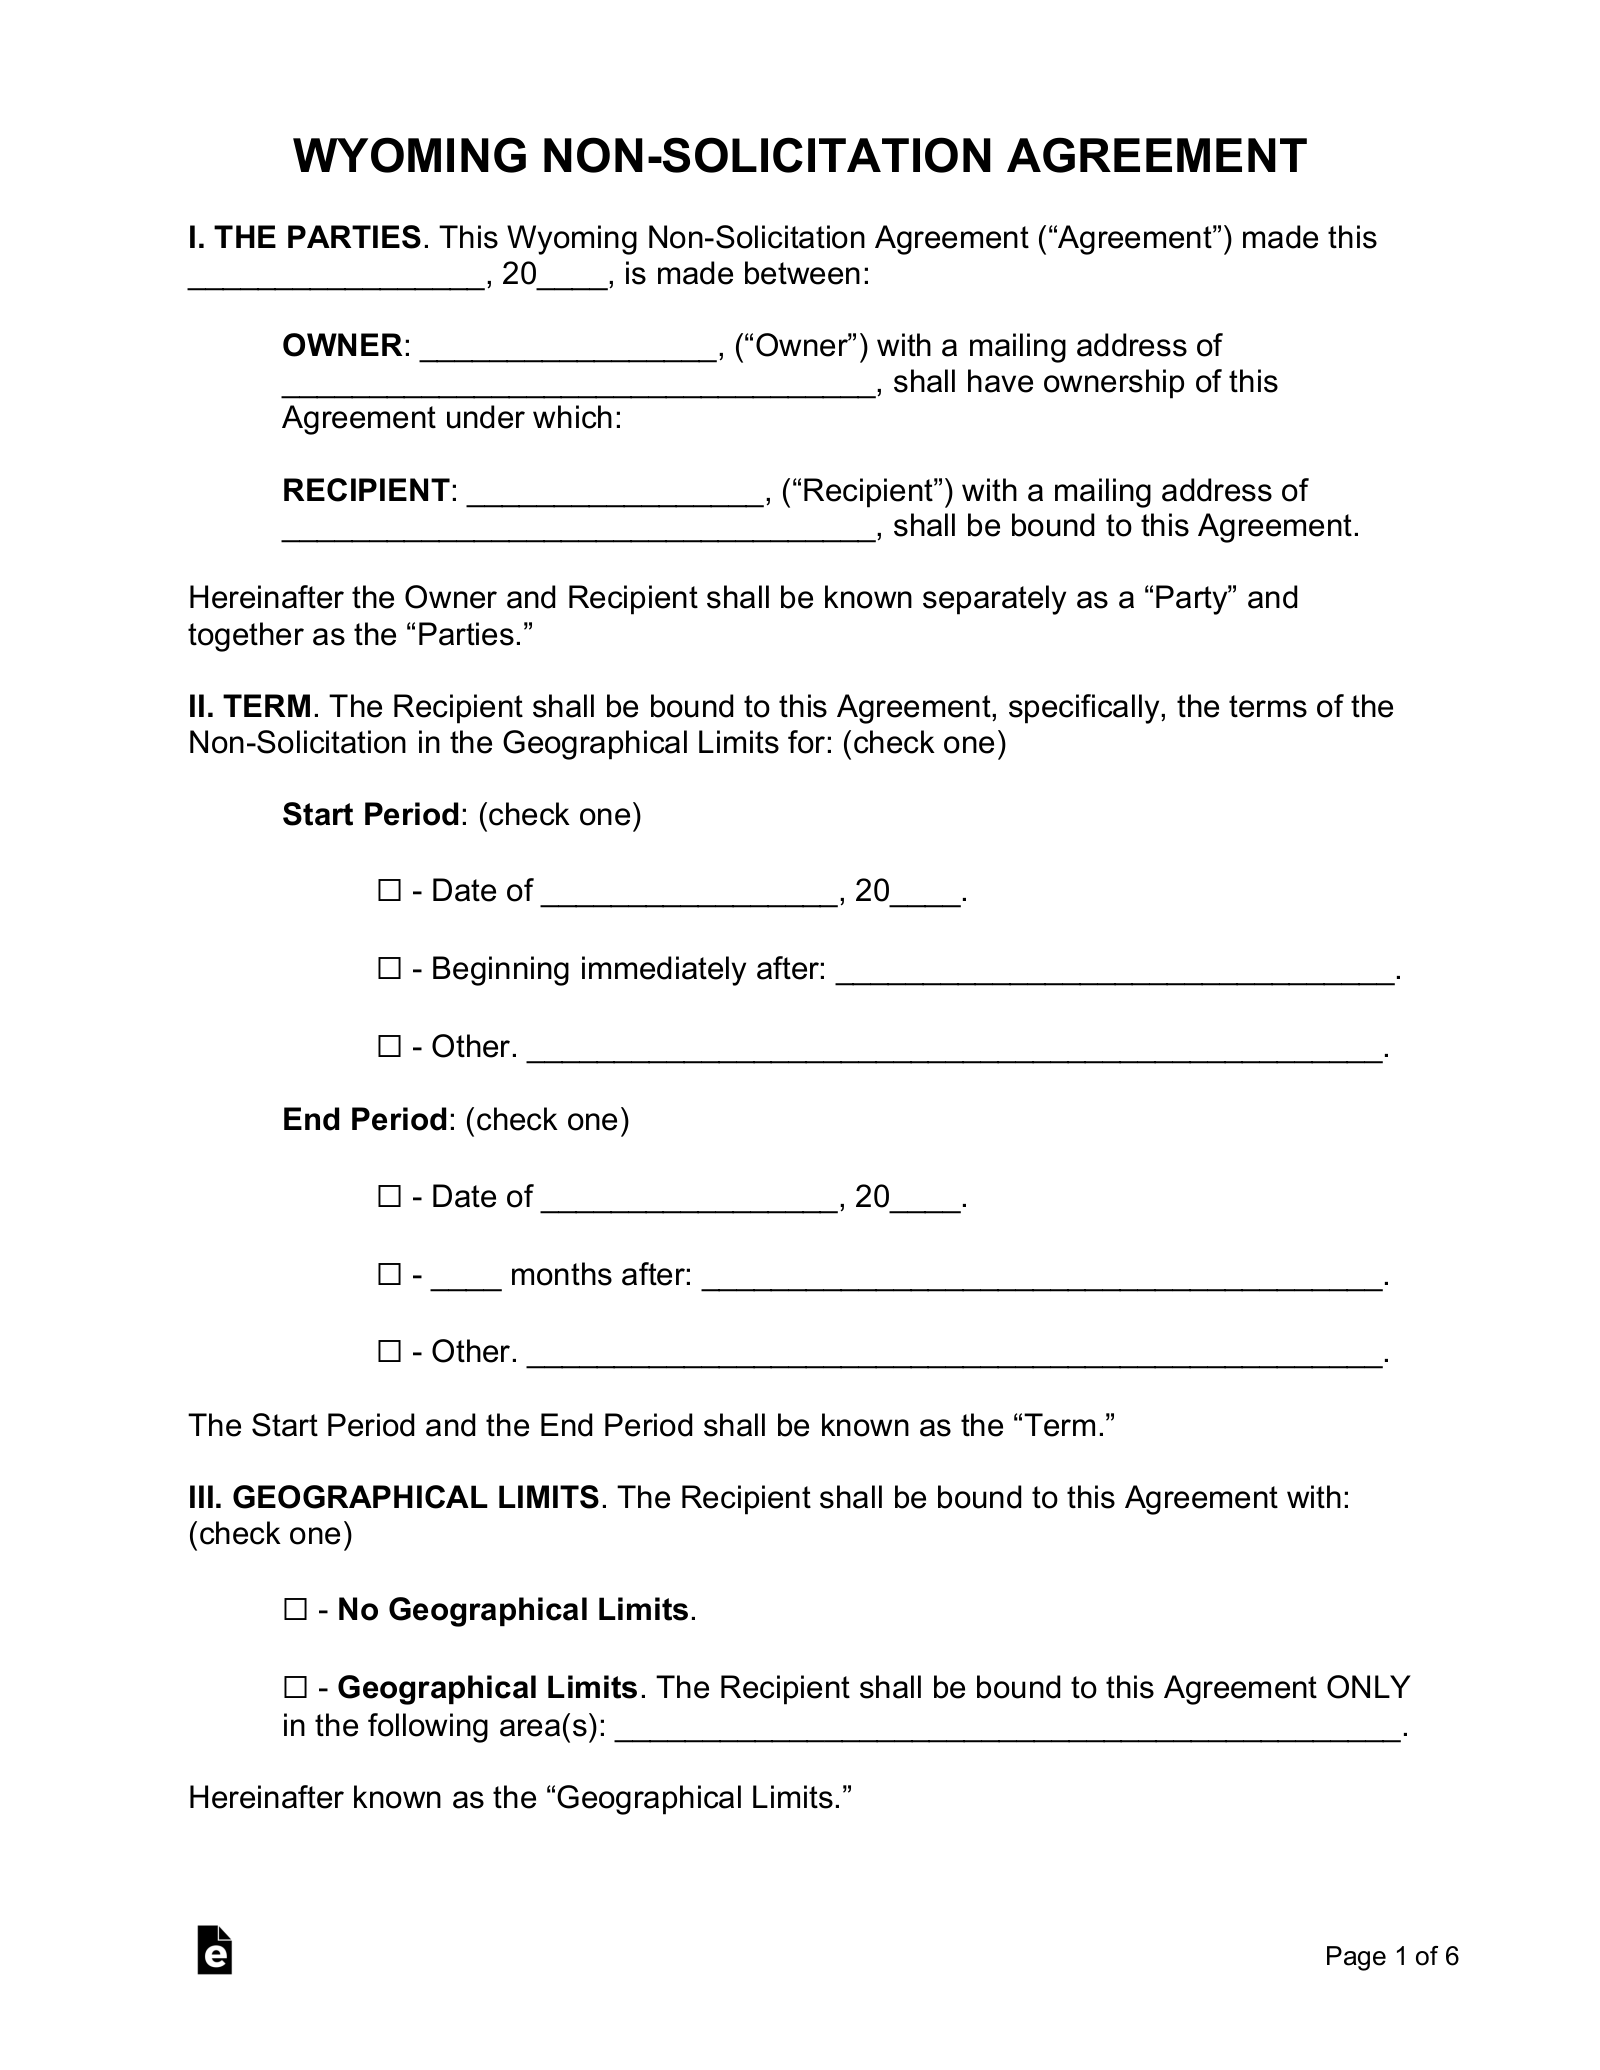 Wyoming Non-Solicitation Agreement